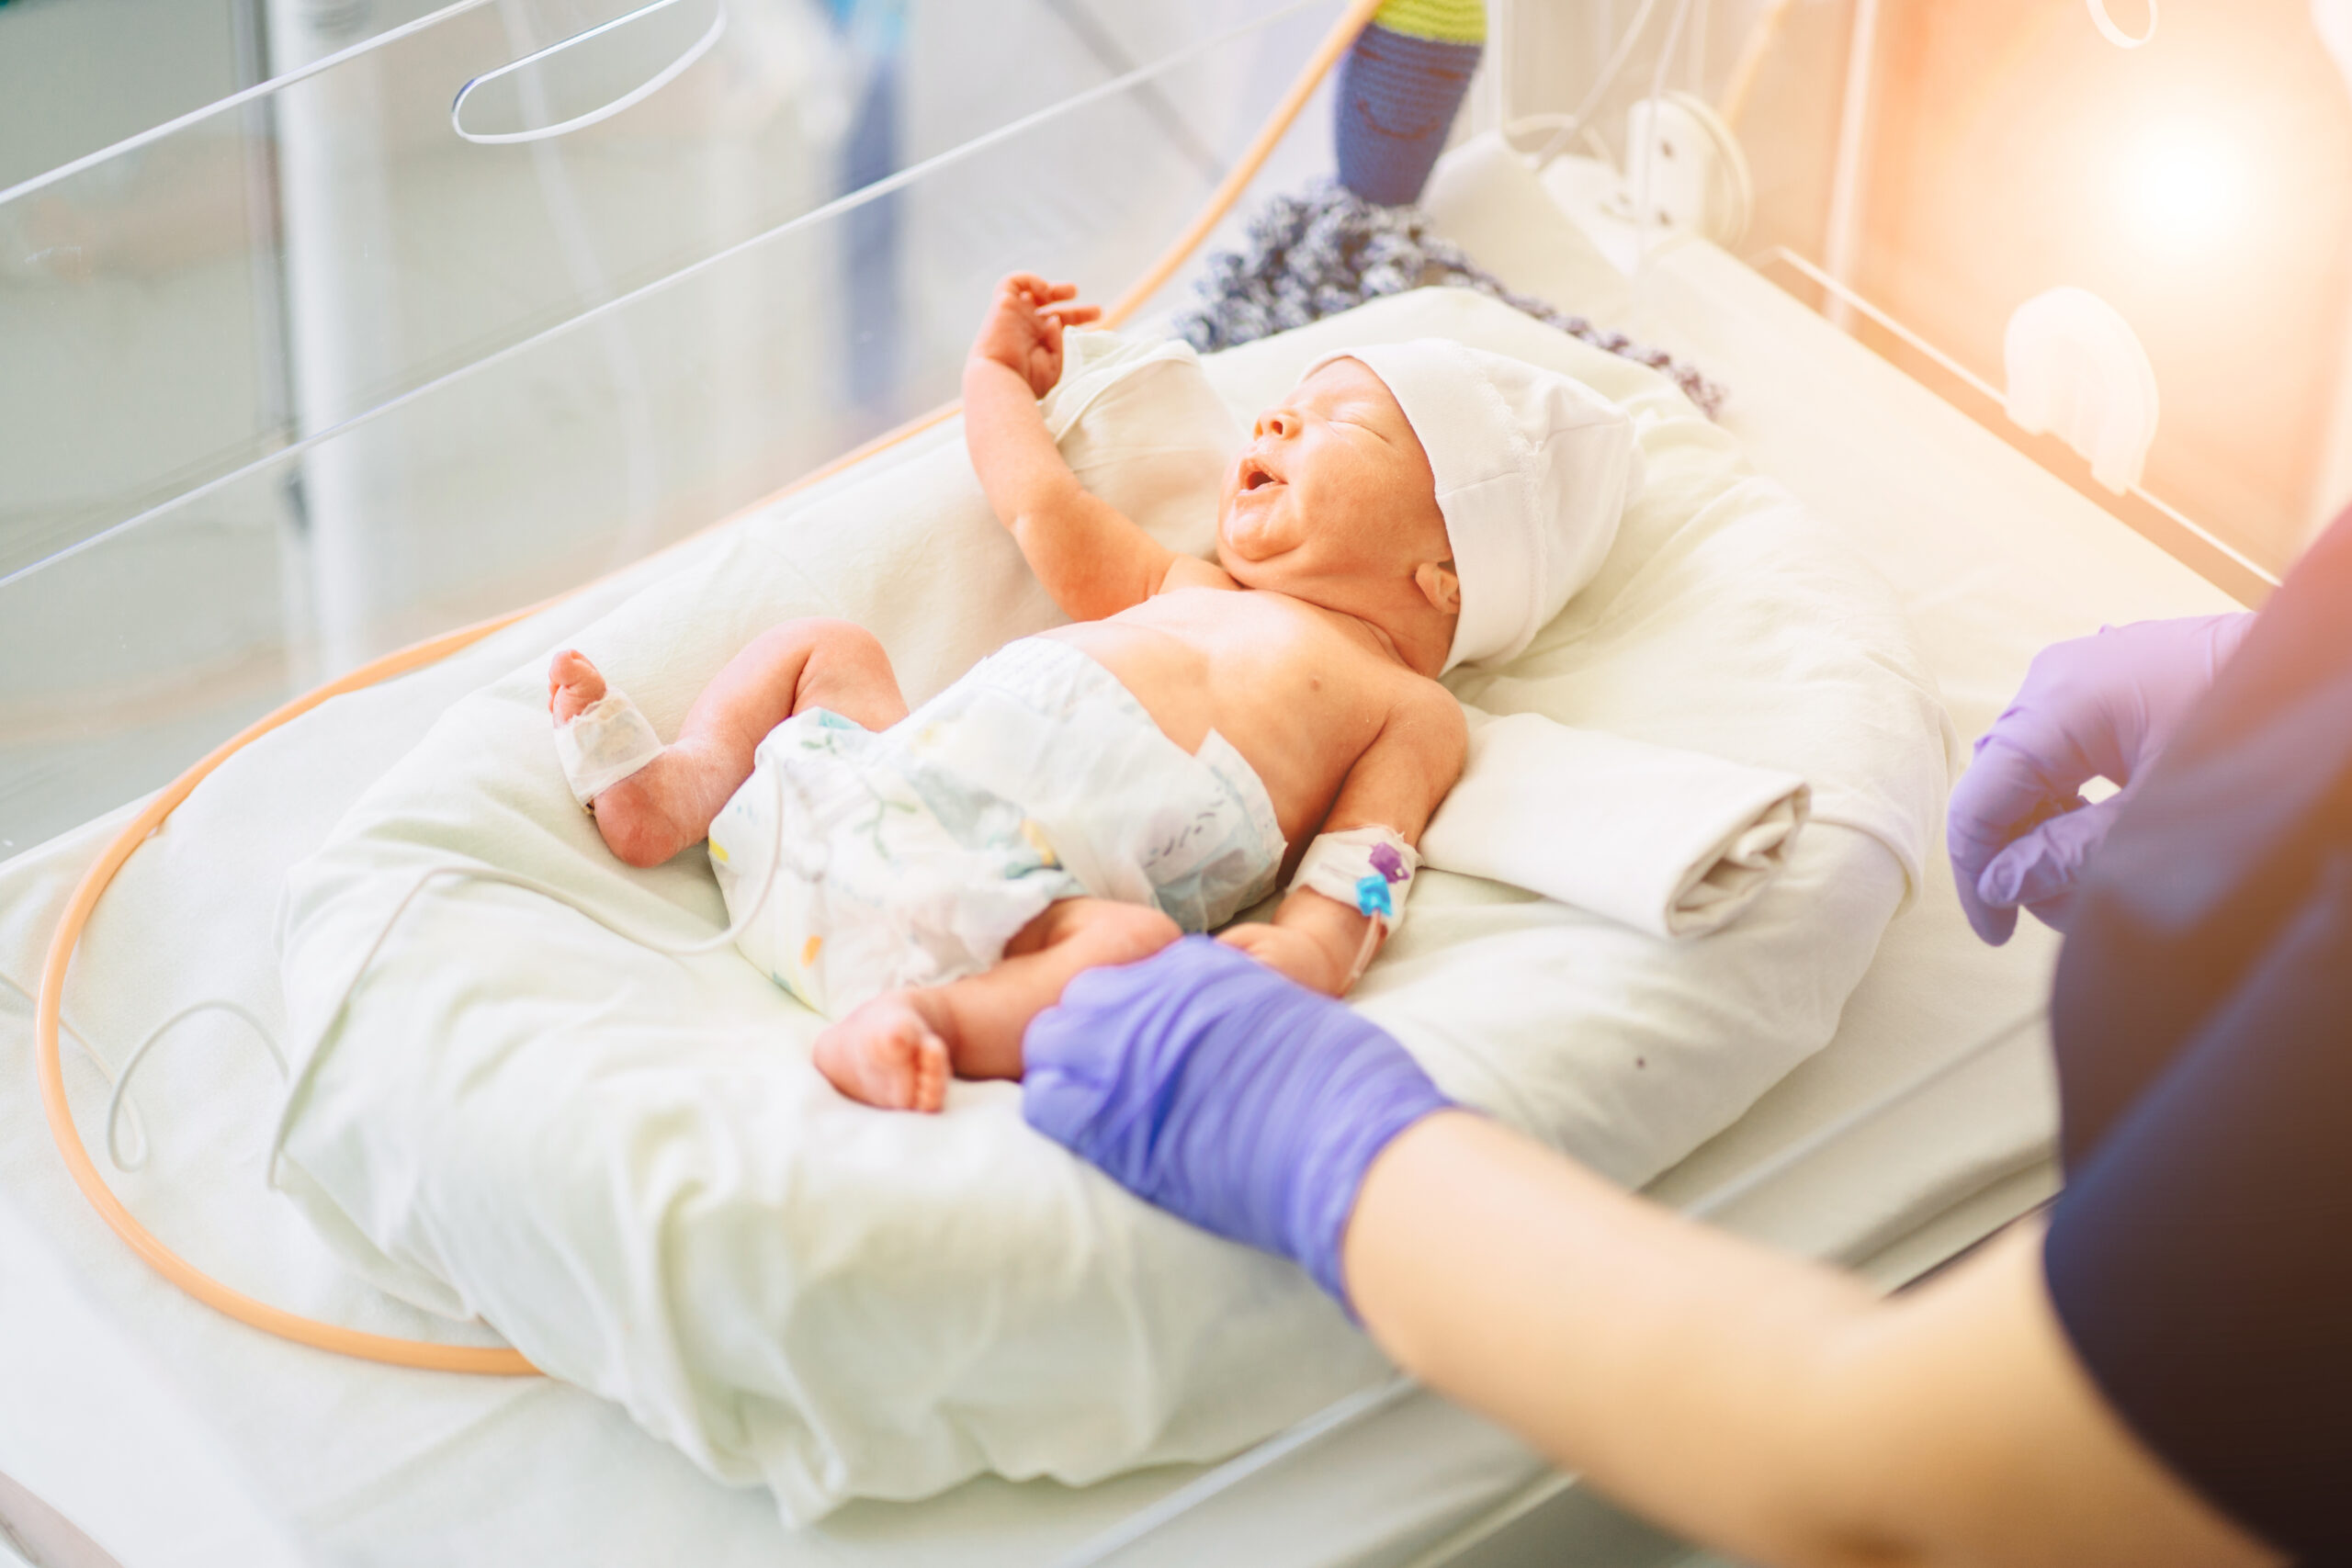 Unrecognizable nurse in blue gloves takes action and care for premature baby, selective focus on baby eye Newborn is placed in the incubator. Neonatal intensive care unit